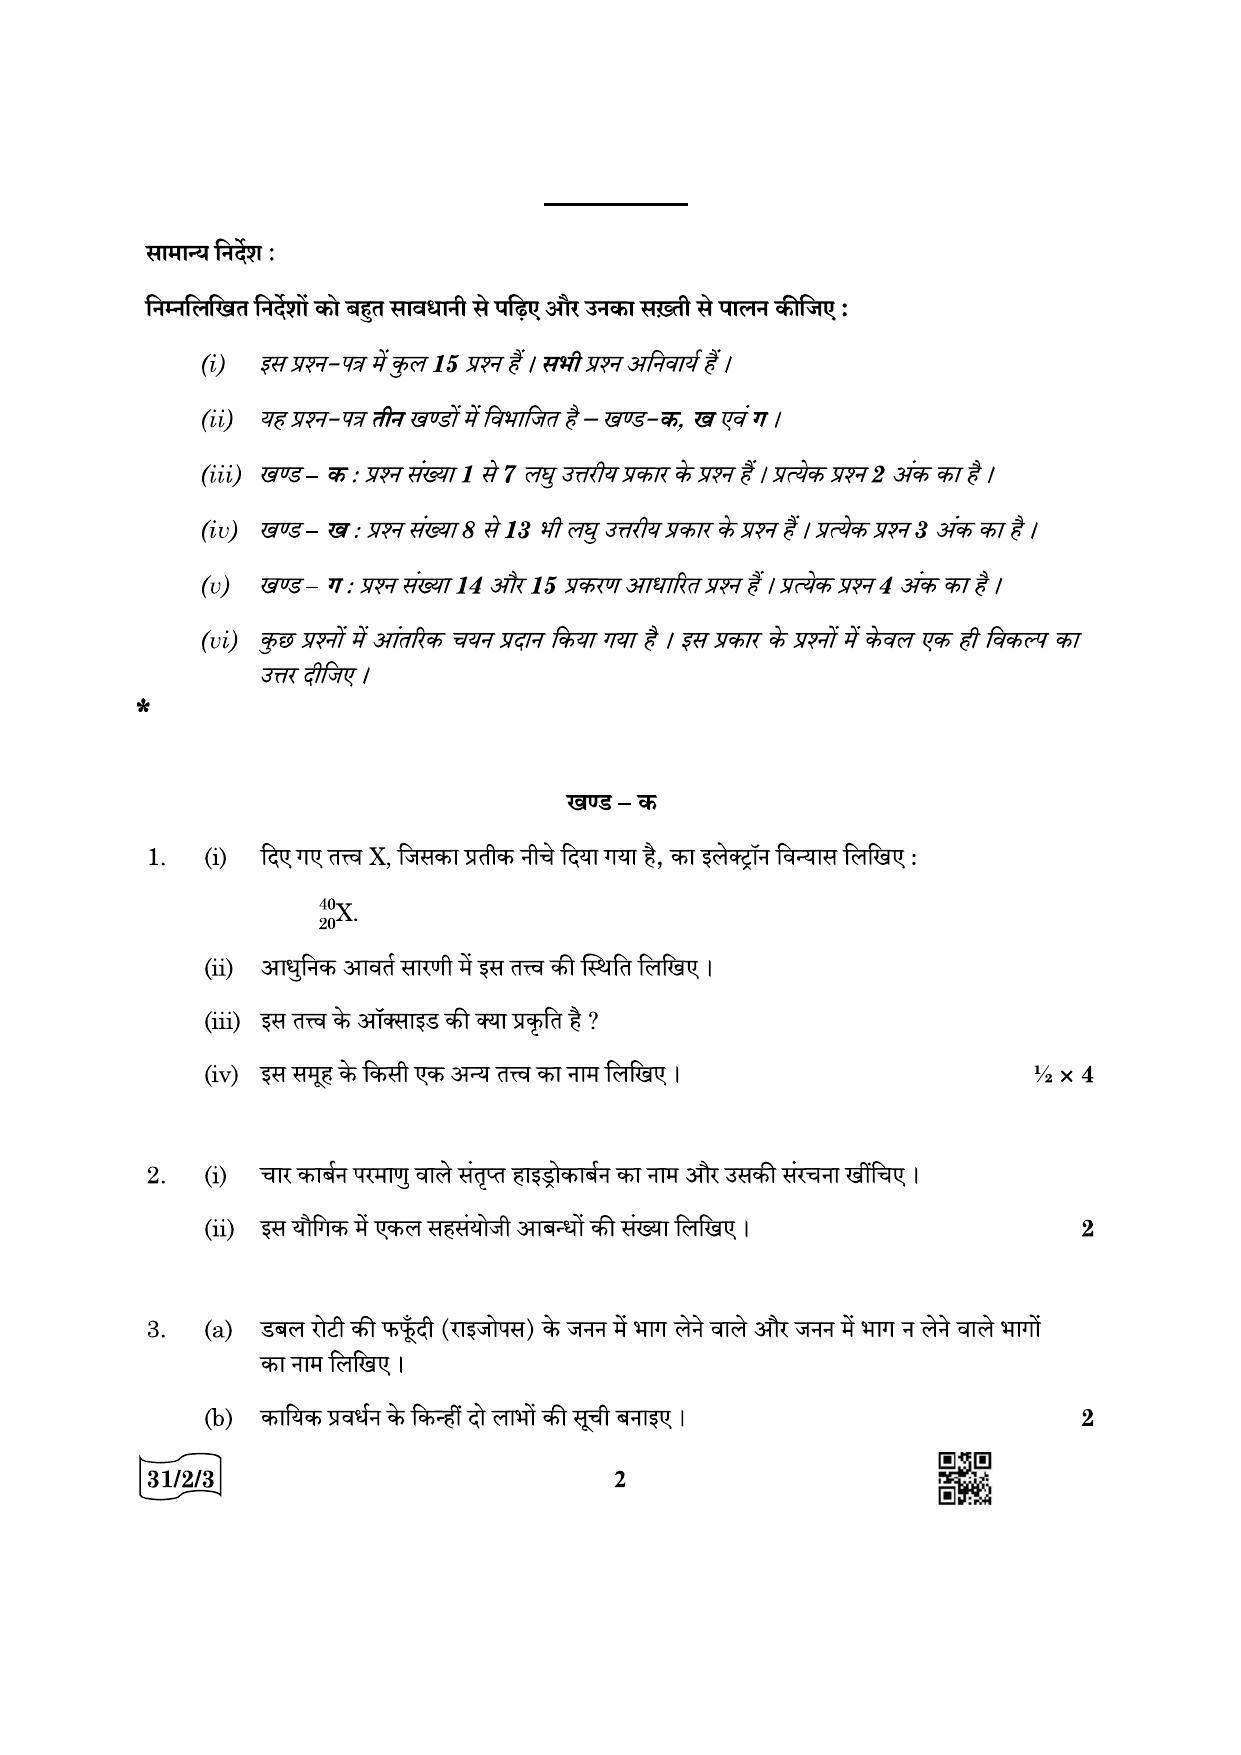 CBSE Class 10 31-2-3 Science 2022 Question Paper - Page 2